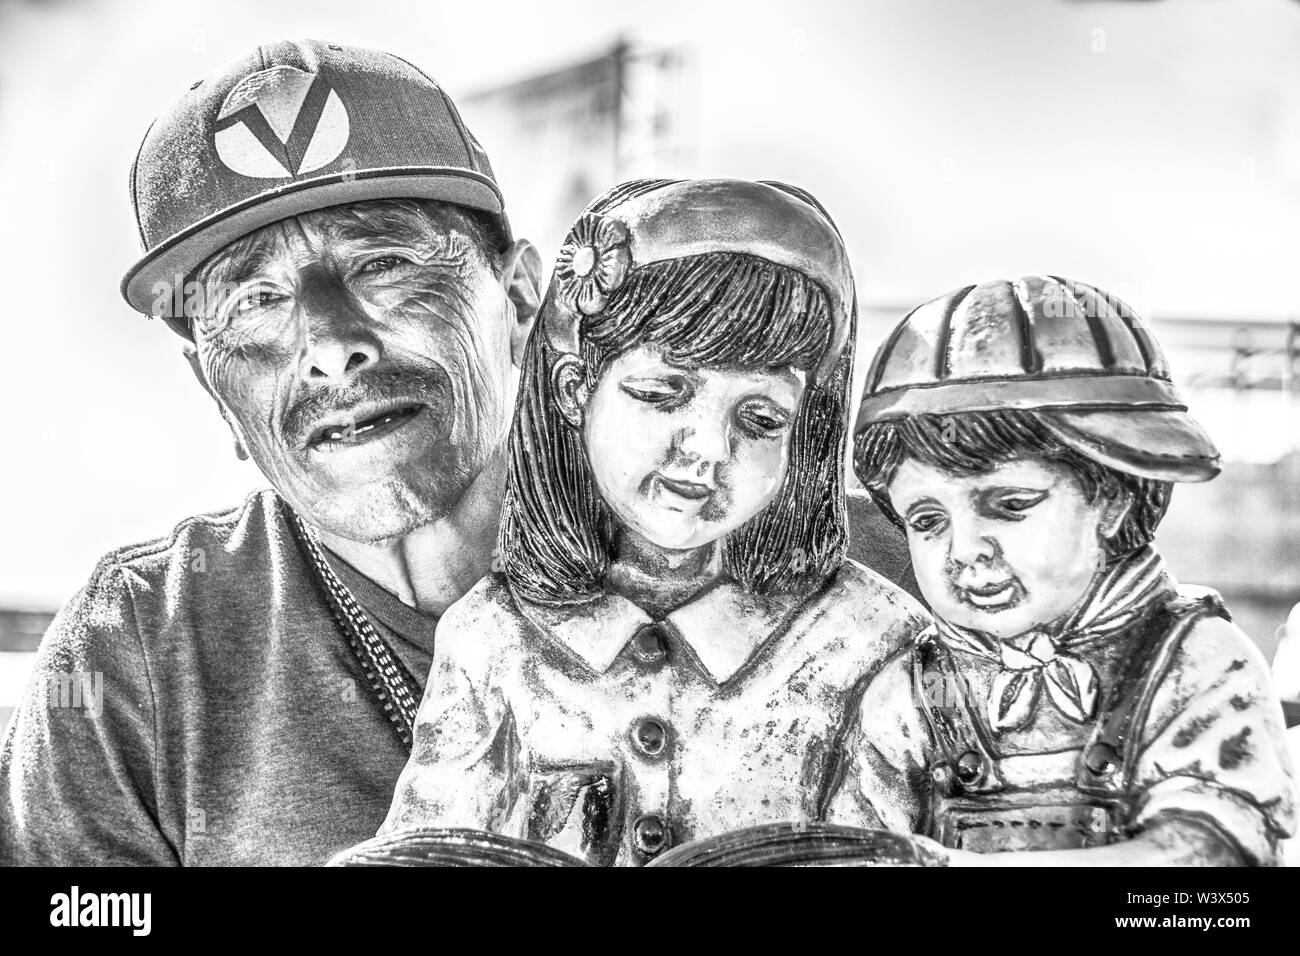 A black and white image of a poor, middle aged man, trying to sell a statue of two young children, at the USA/Mexico border crossing. Stock Photo